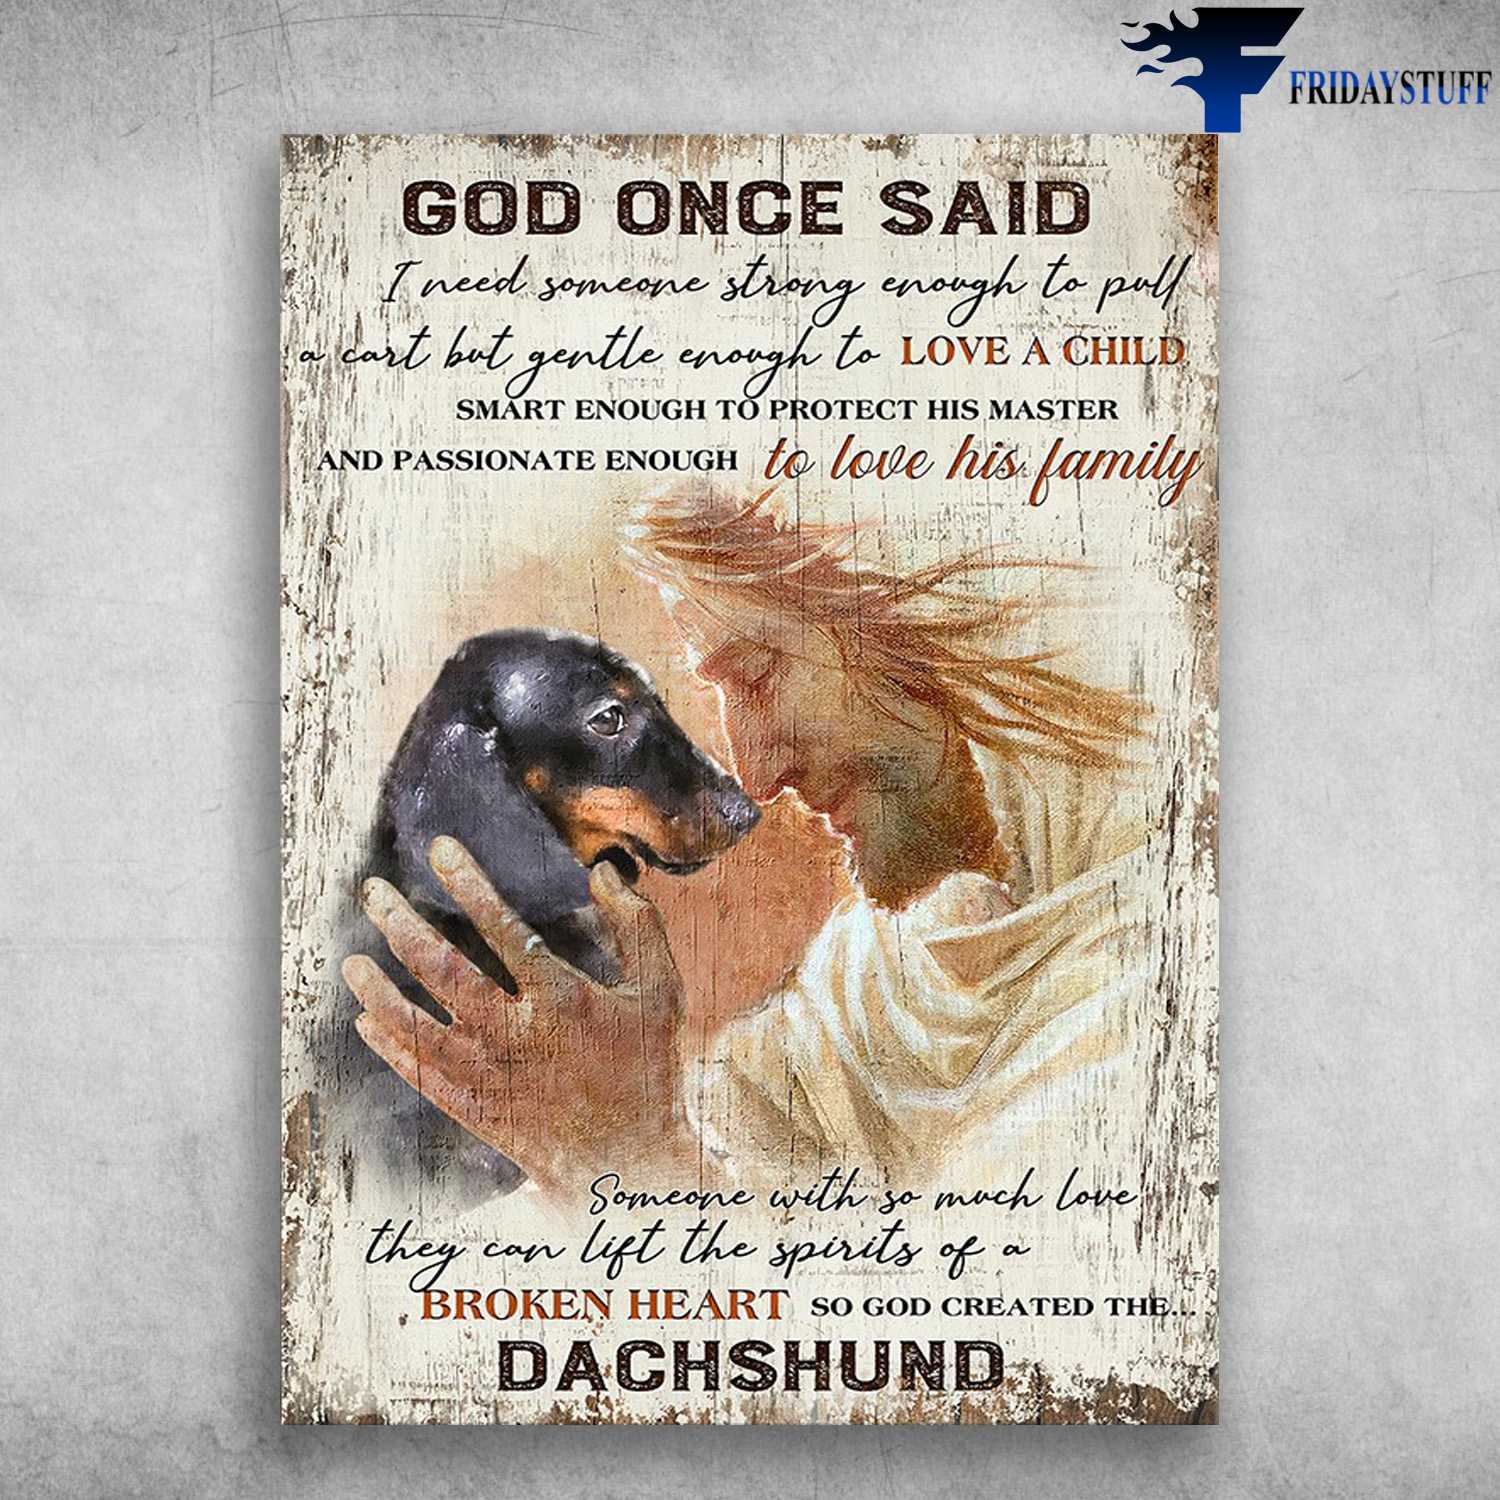 Dachshund And Jesus - God Once Said, I Need Someone Strong Enough To Pull A Cart, But Gentle Enough To Love A Child, Smart Enough To Love A Child, Smart Enough To Protect His Master, God Dog Lover